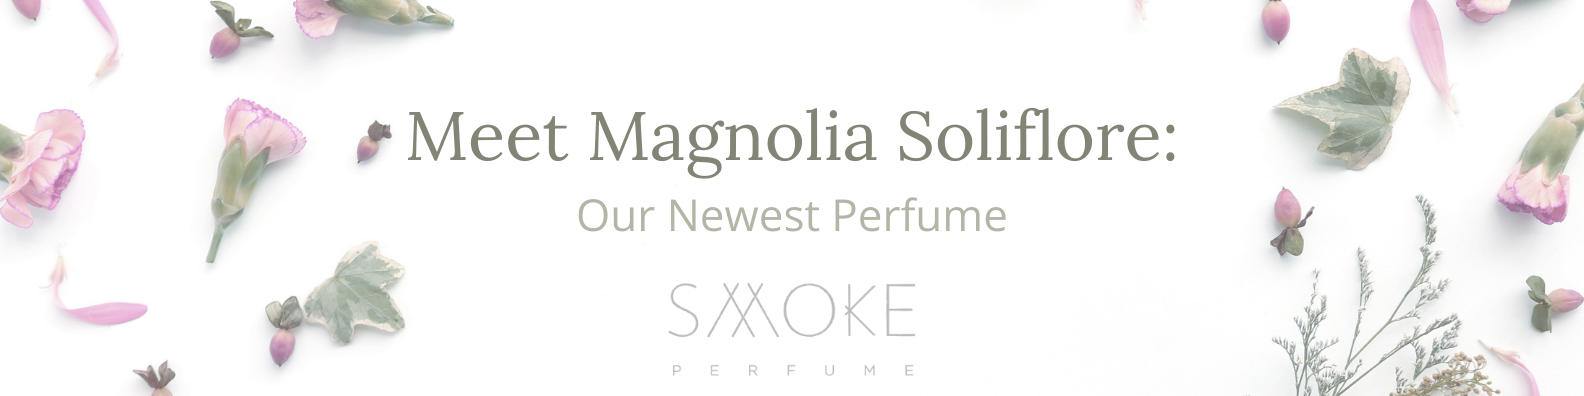 Meet Magnolia Soliflore: Our Newest Perfume